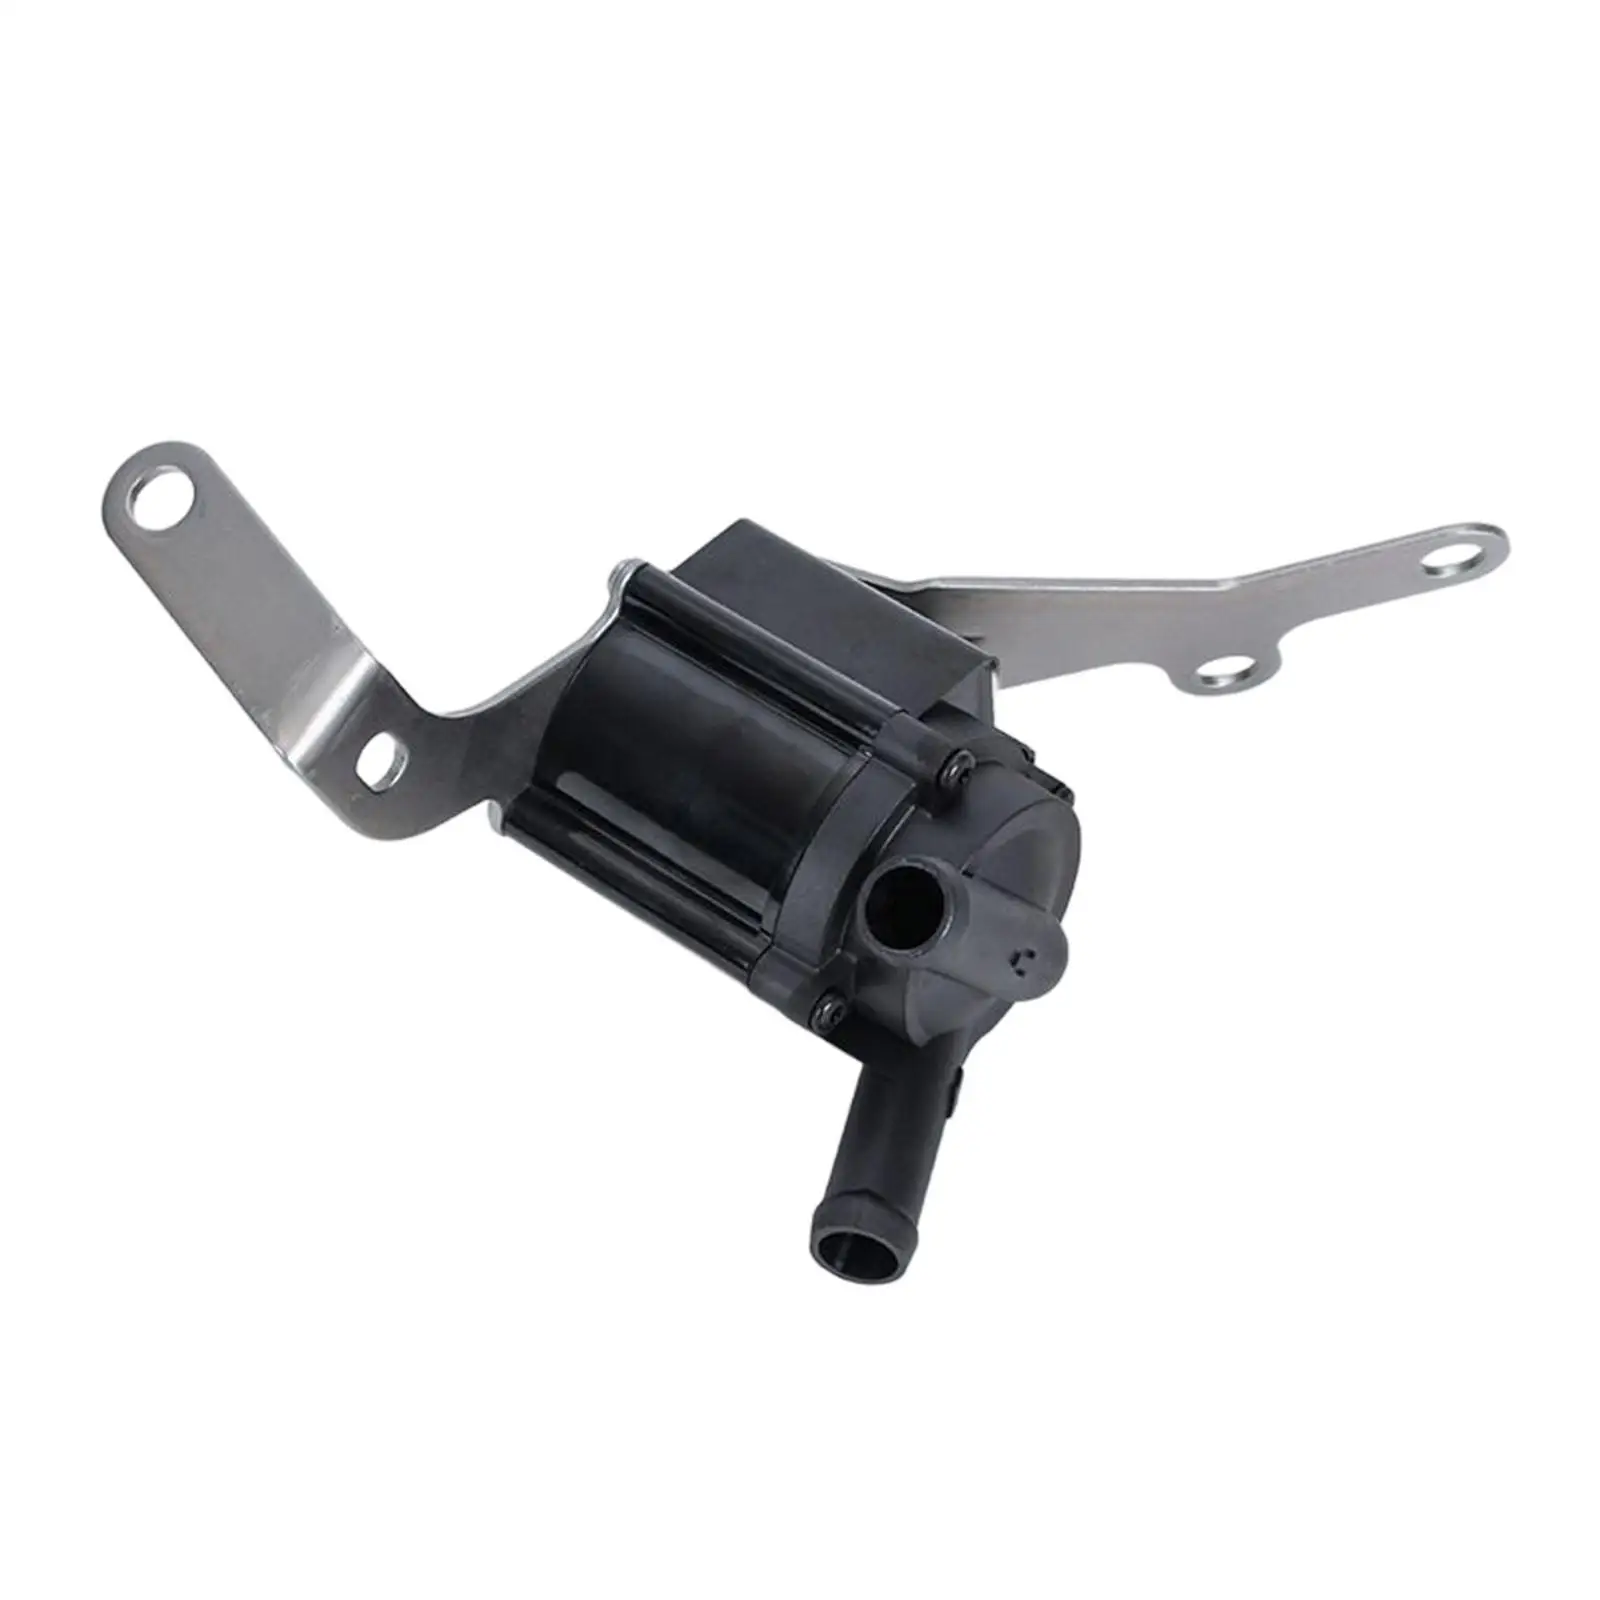 Auto Electronic Water Pump Parts Replacement Easy to Install Stable Performance Premium High Efficiency for Haval Cars